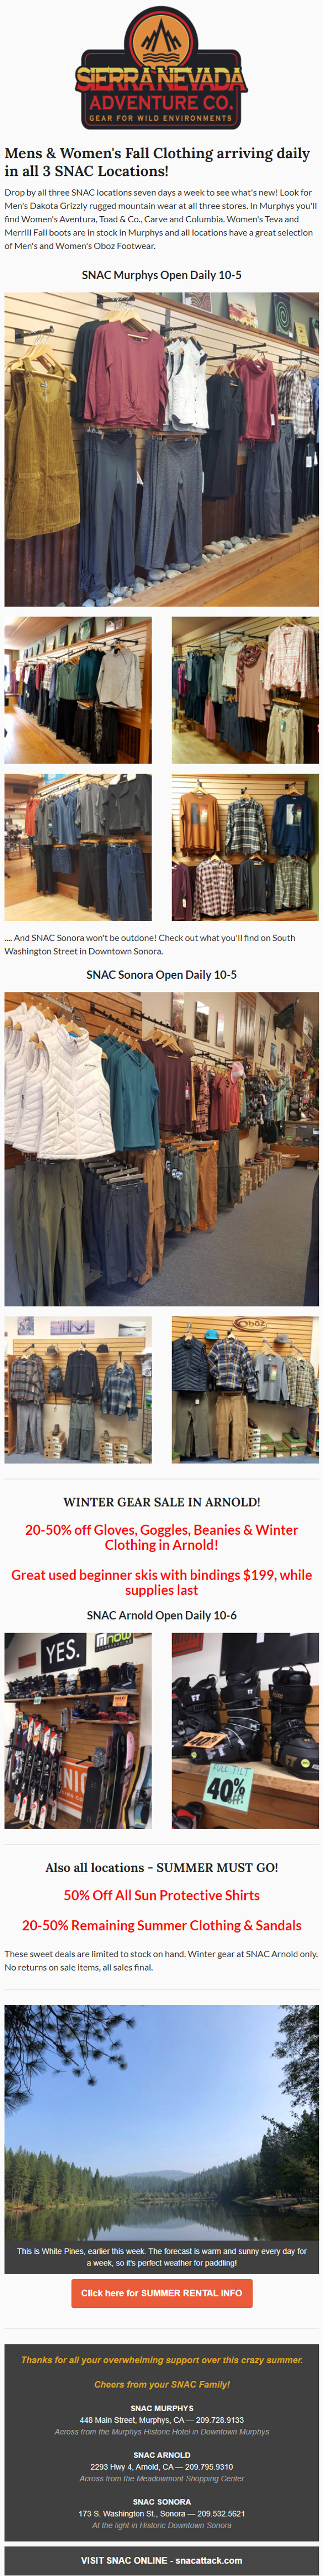 Mens & Women’s Fall Clothing arriving daily in all 3 SNAC Locations!